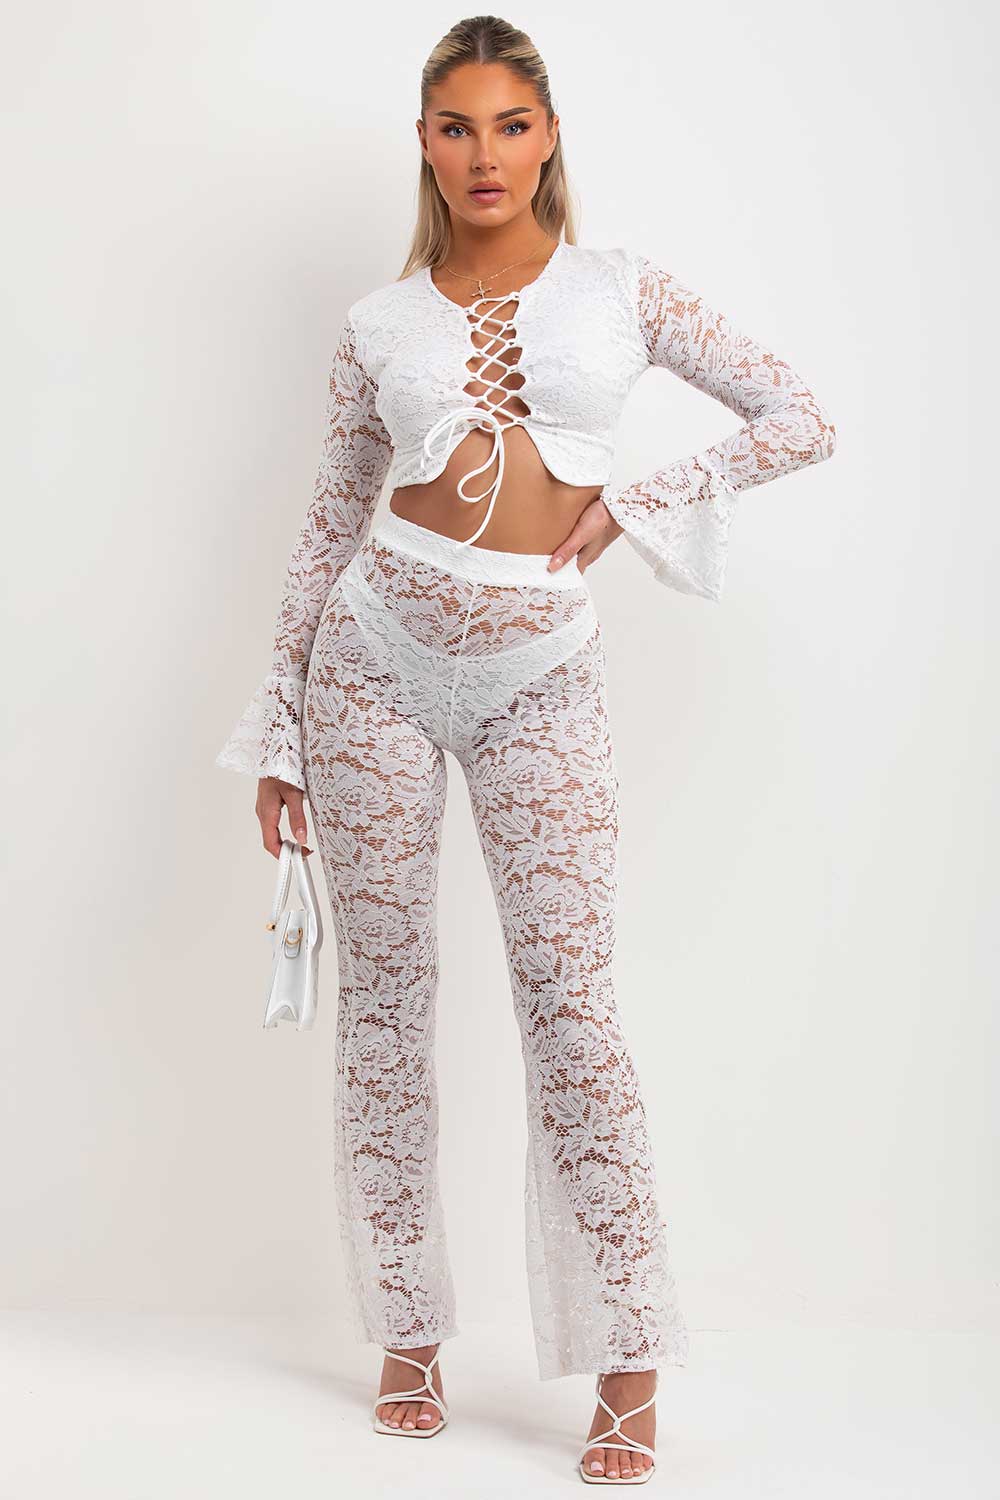 lace trousers and flare sleeve top two piece co ord set going out summer festival rave outfit white